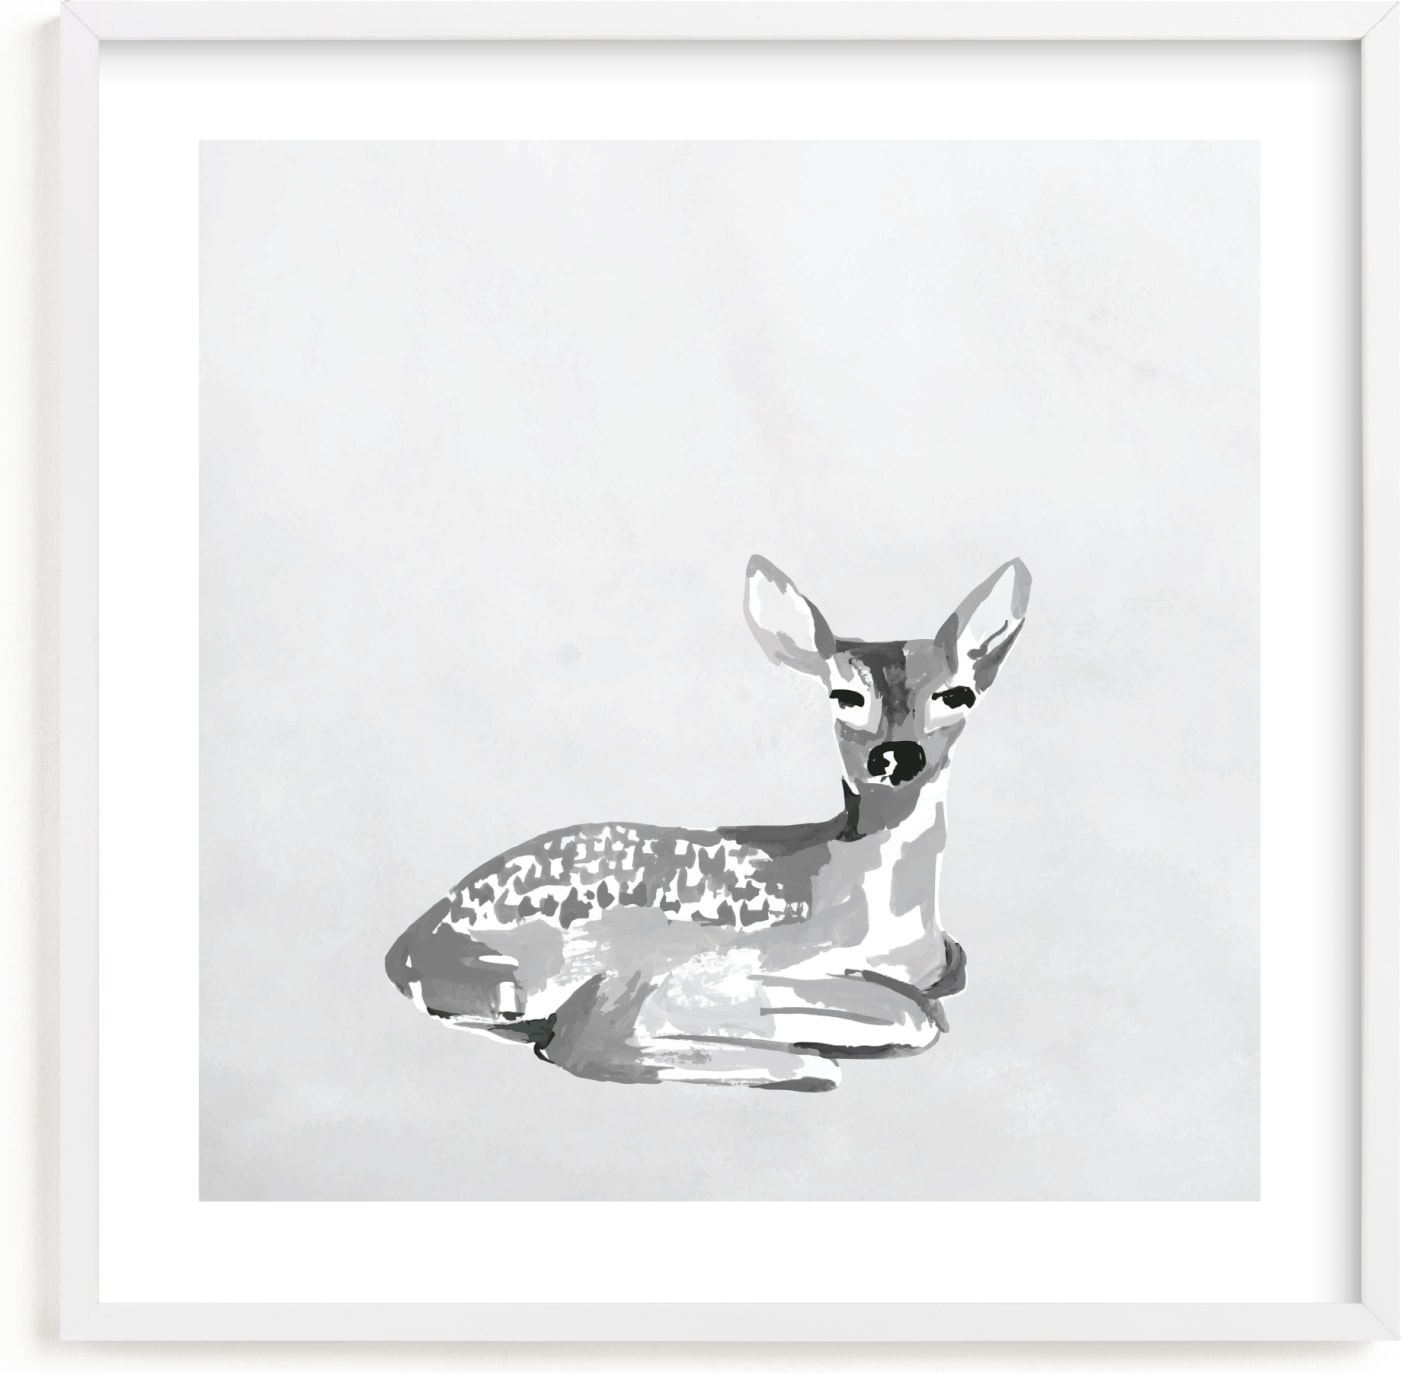 This is a black and white nursery wall art by Teju Reval called Enchanted Deer I.